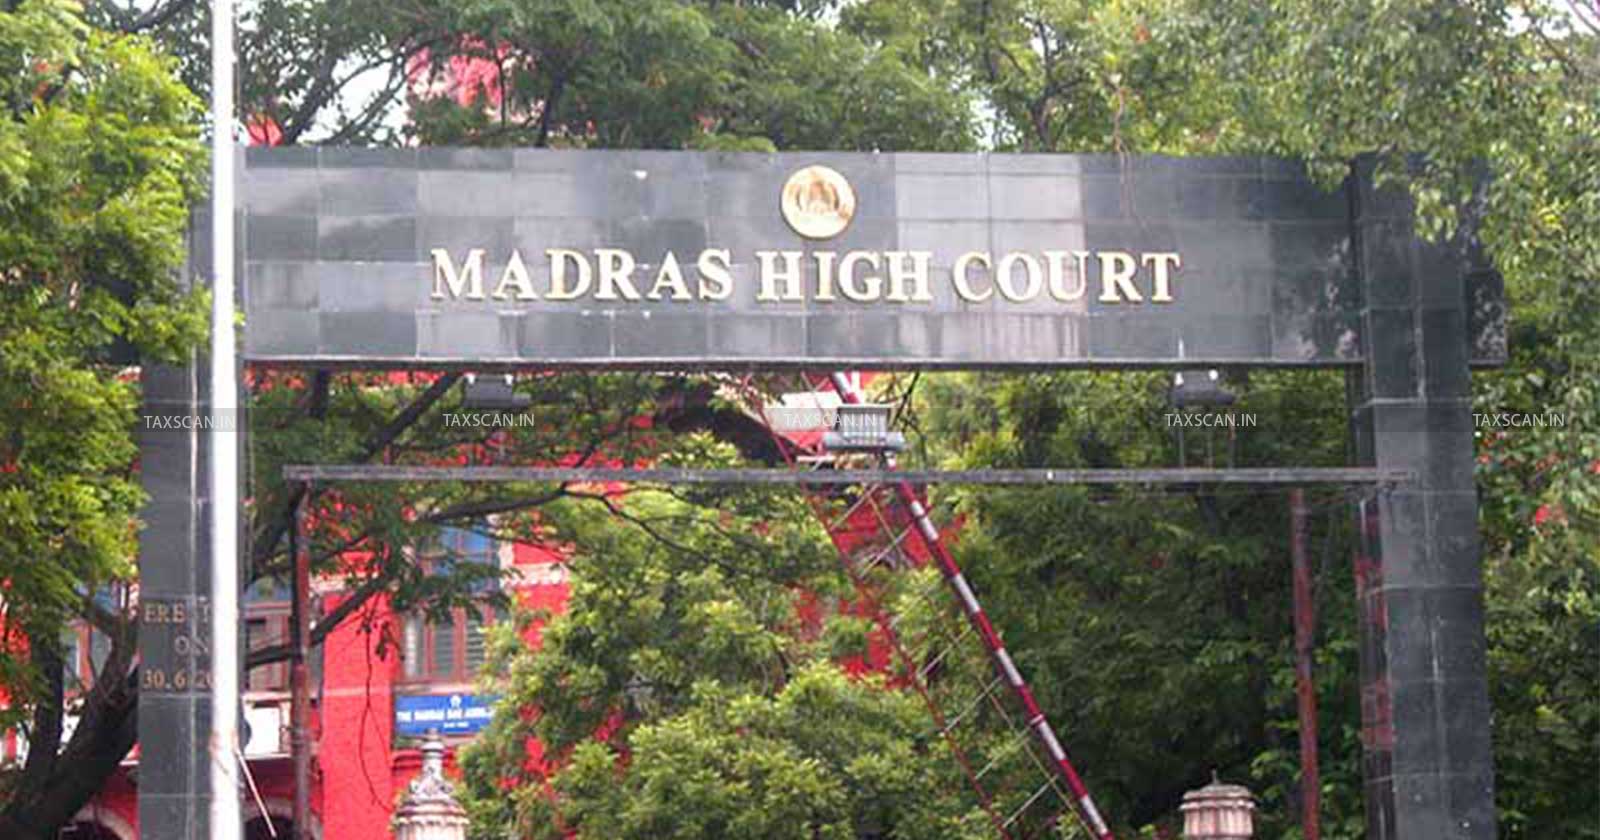 Madras High Court - Income tax - Income tax news - Writ Petitions - taxscan